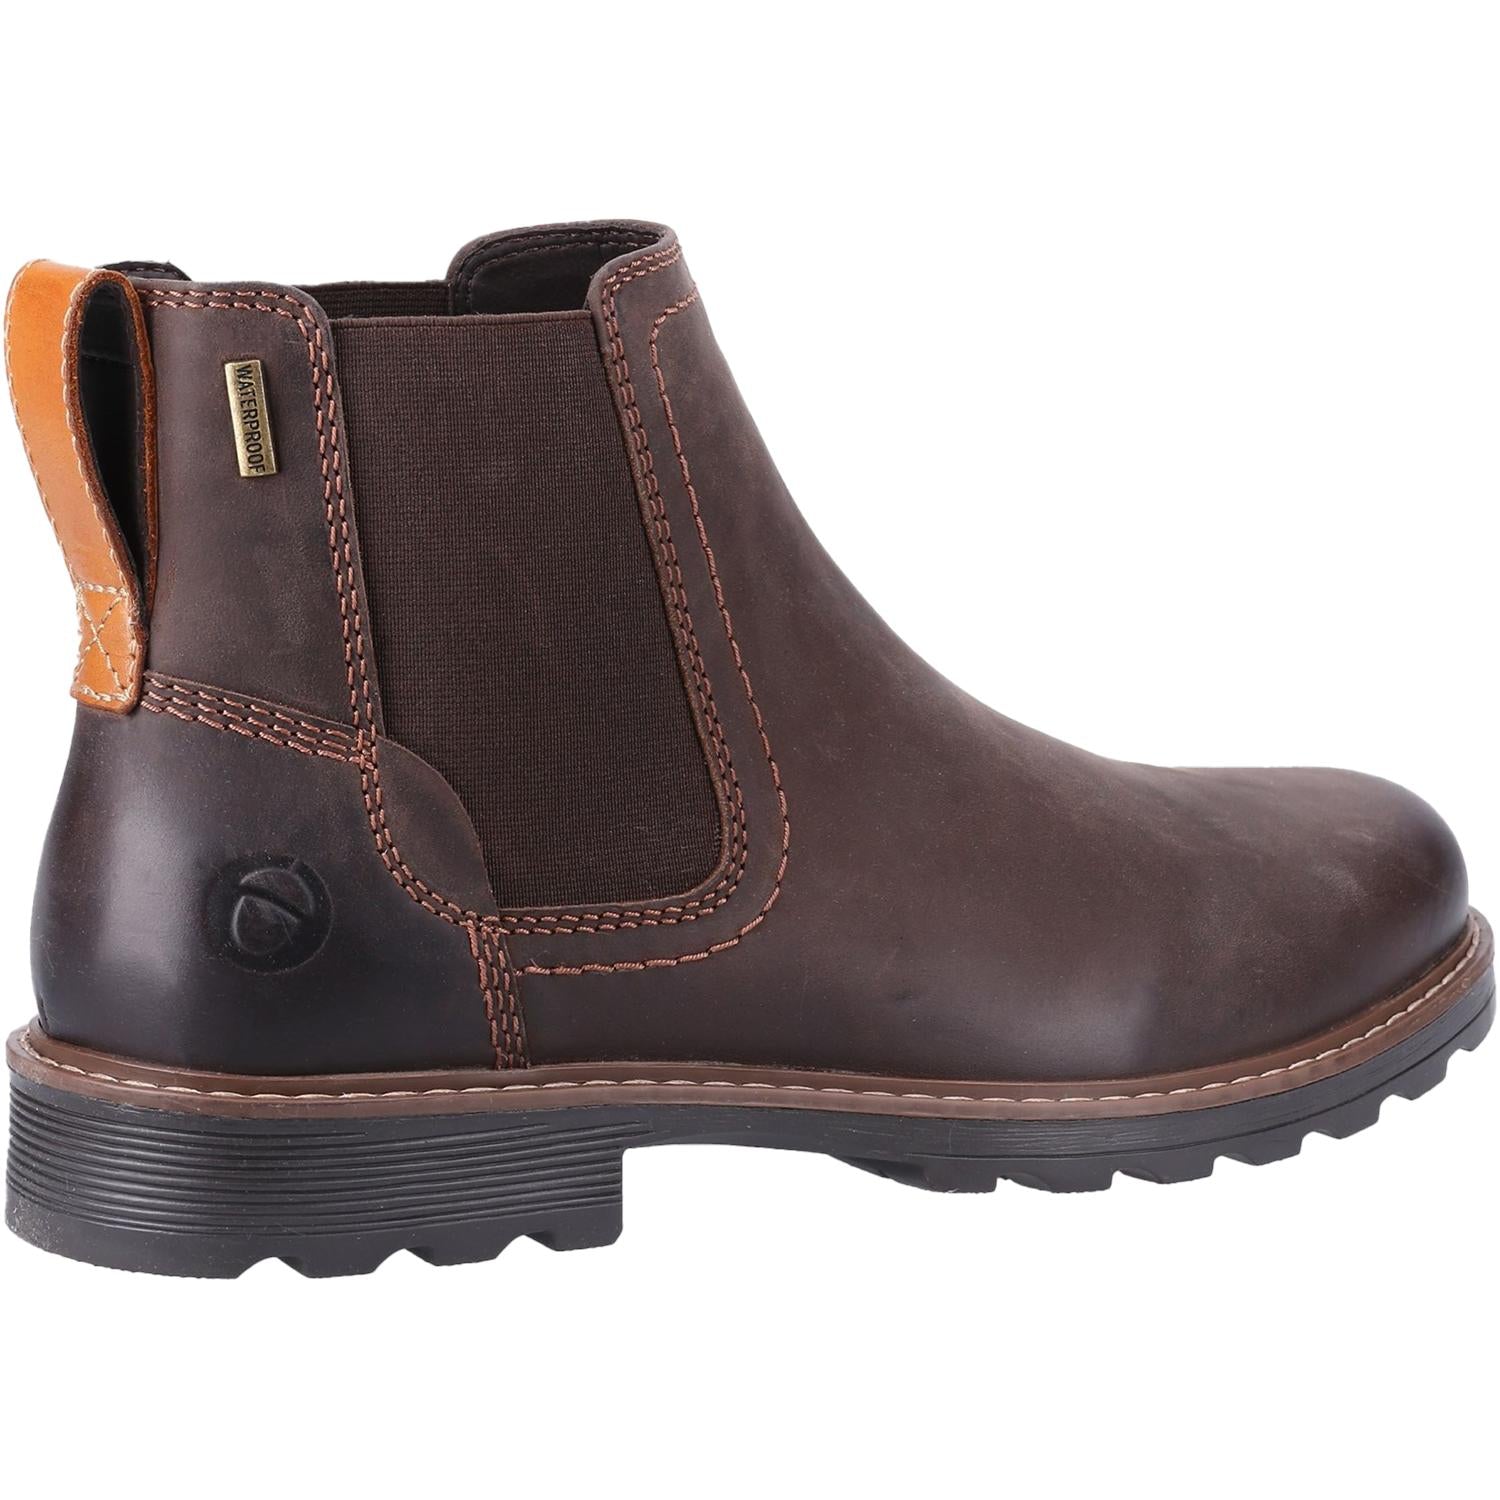 Cotswold Nibley Boots